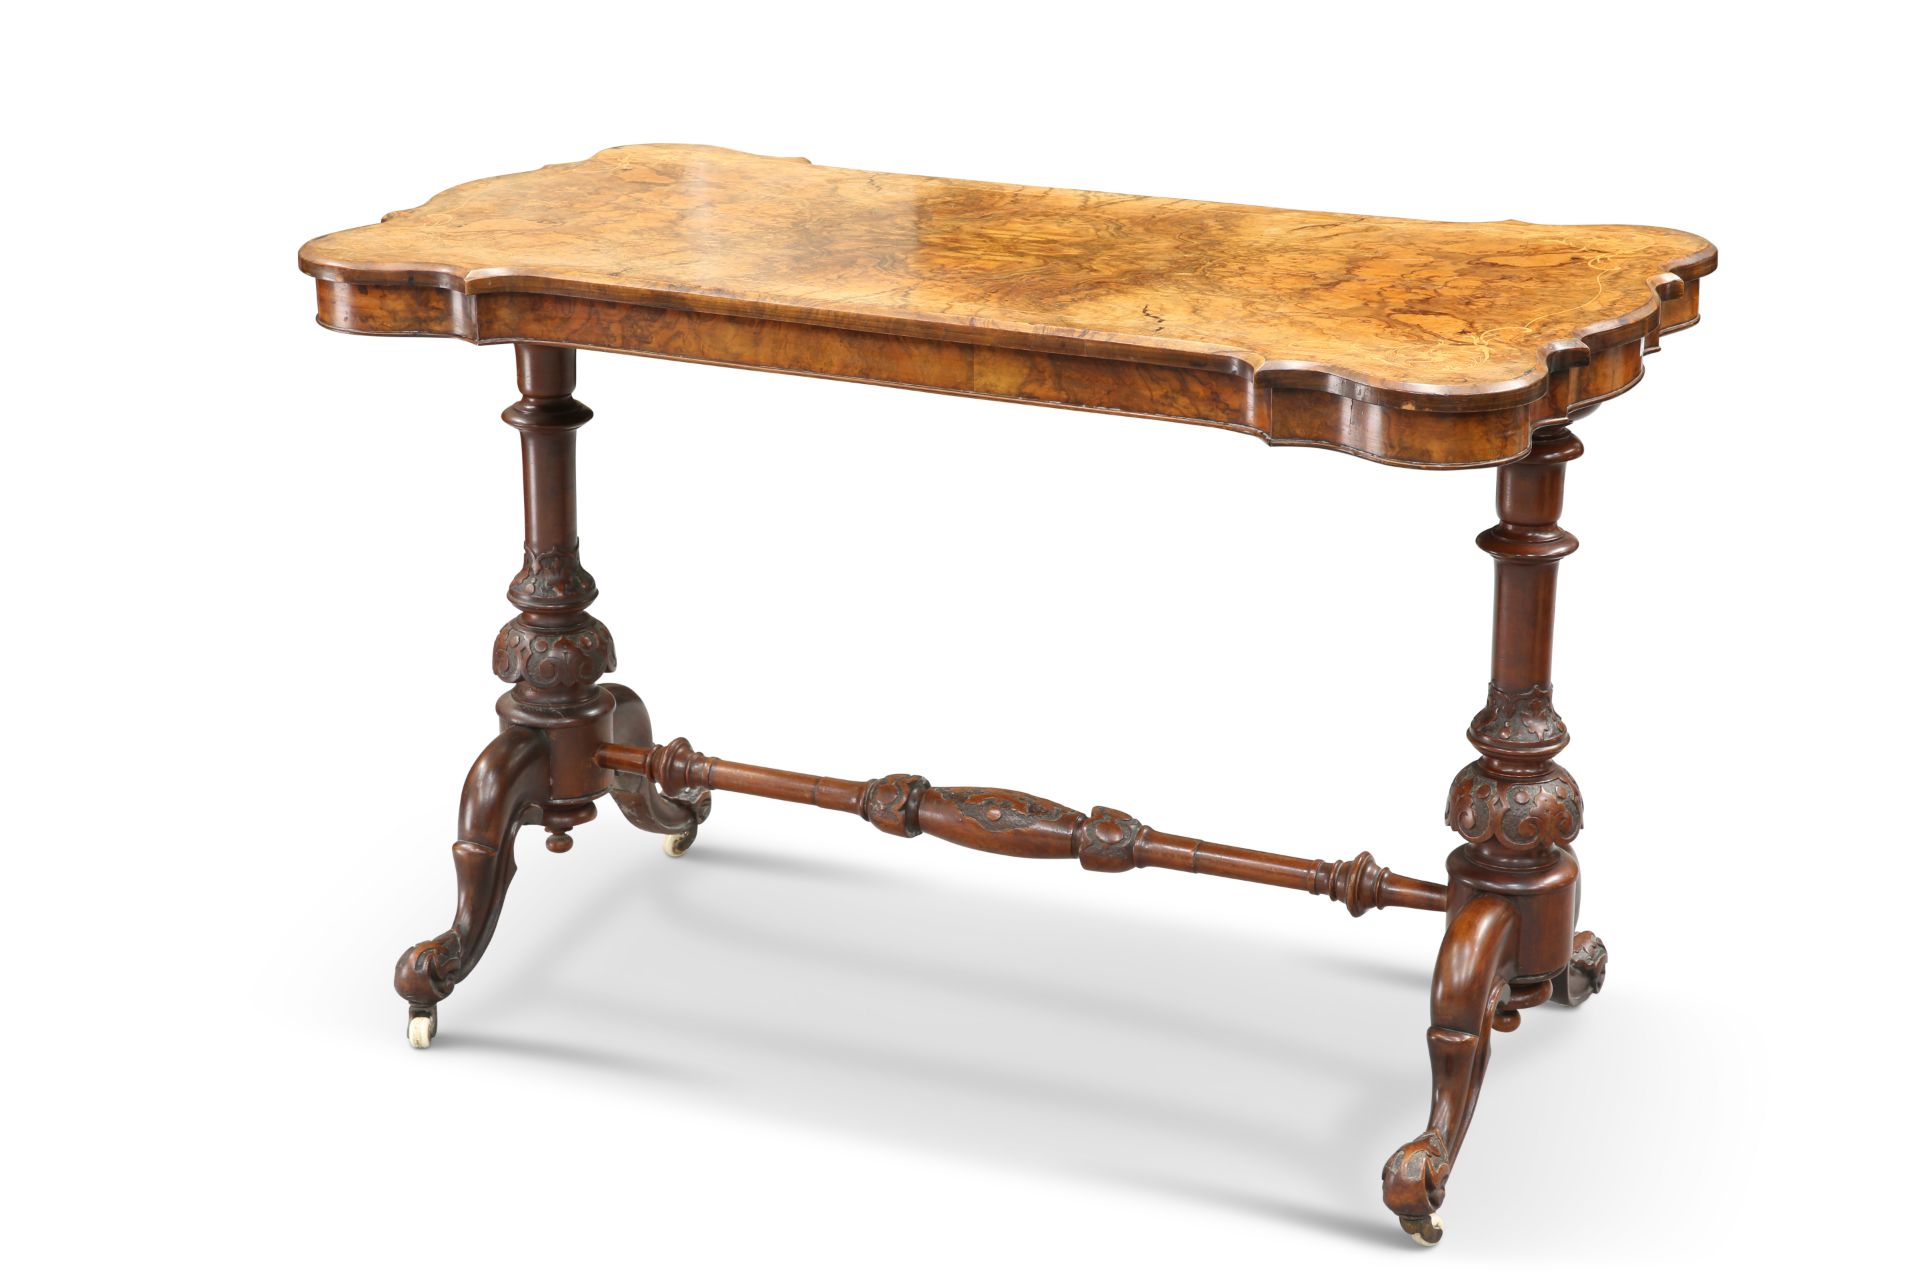 A VICTORIAN BURR WALNUT SIDE TABLE, BY TURNER LIVERPOOL